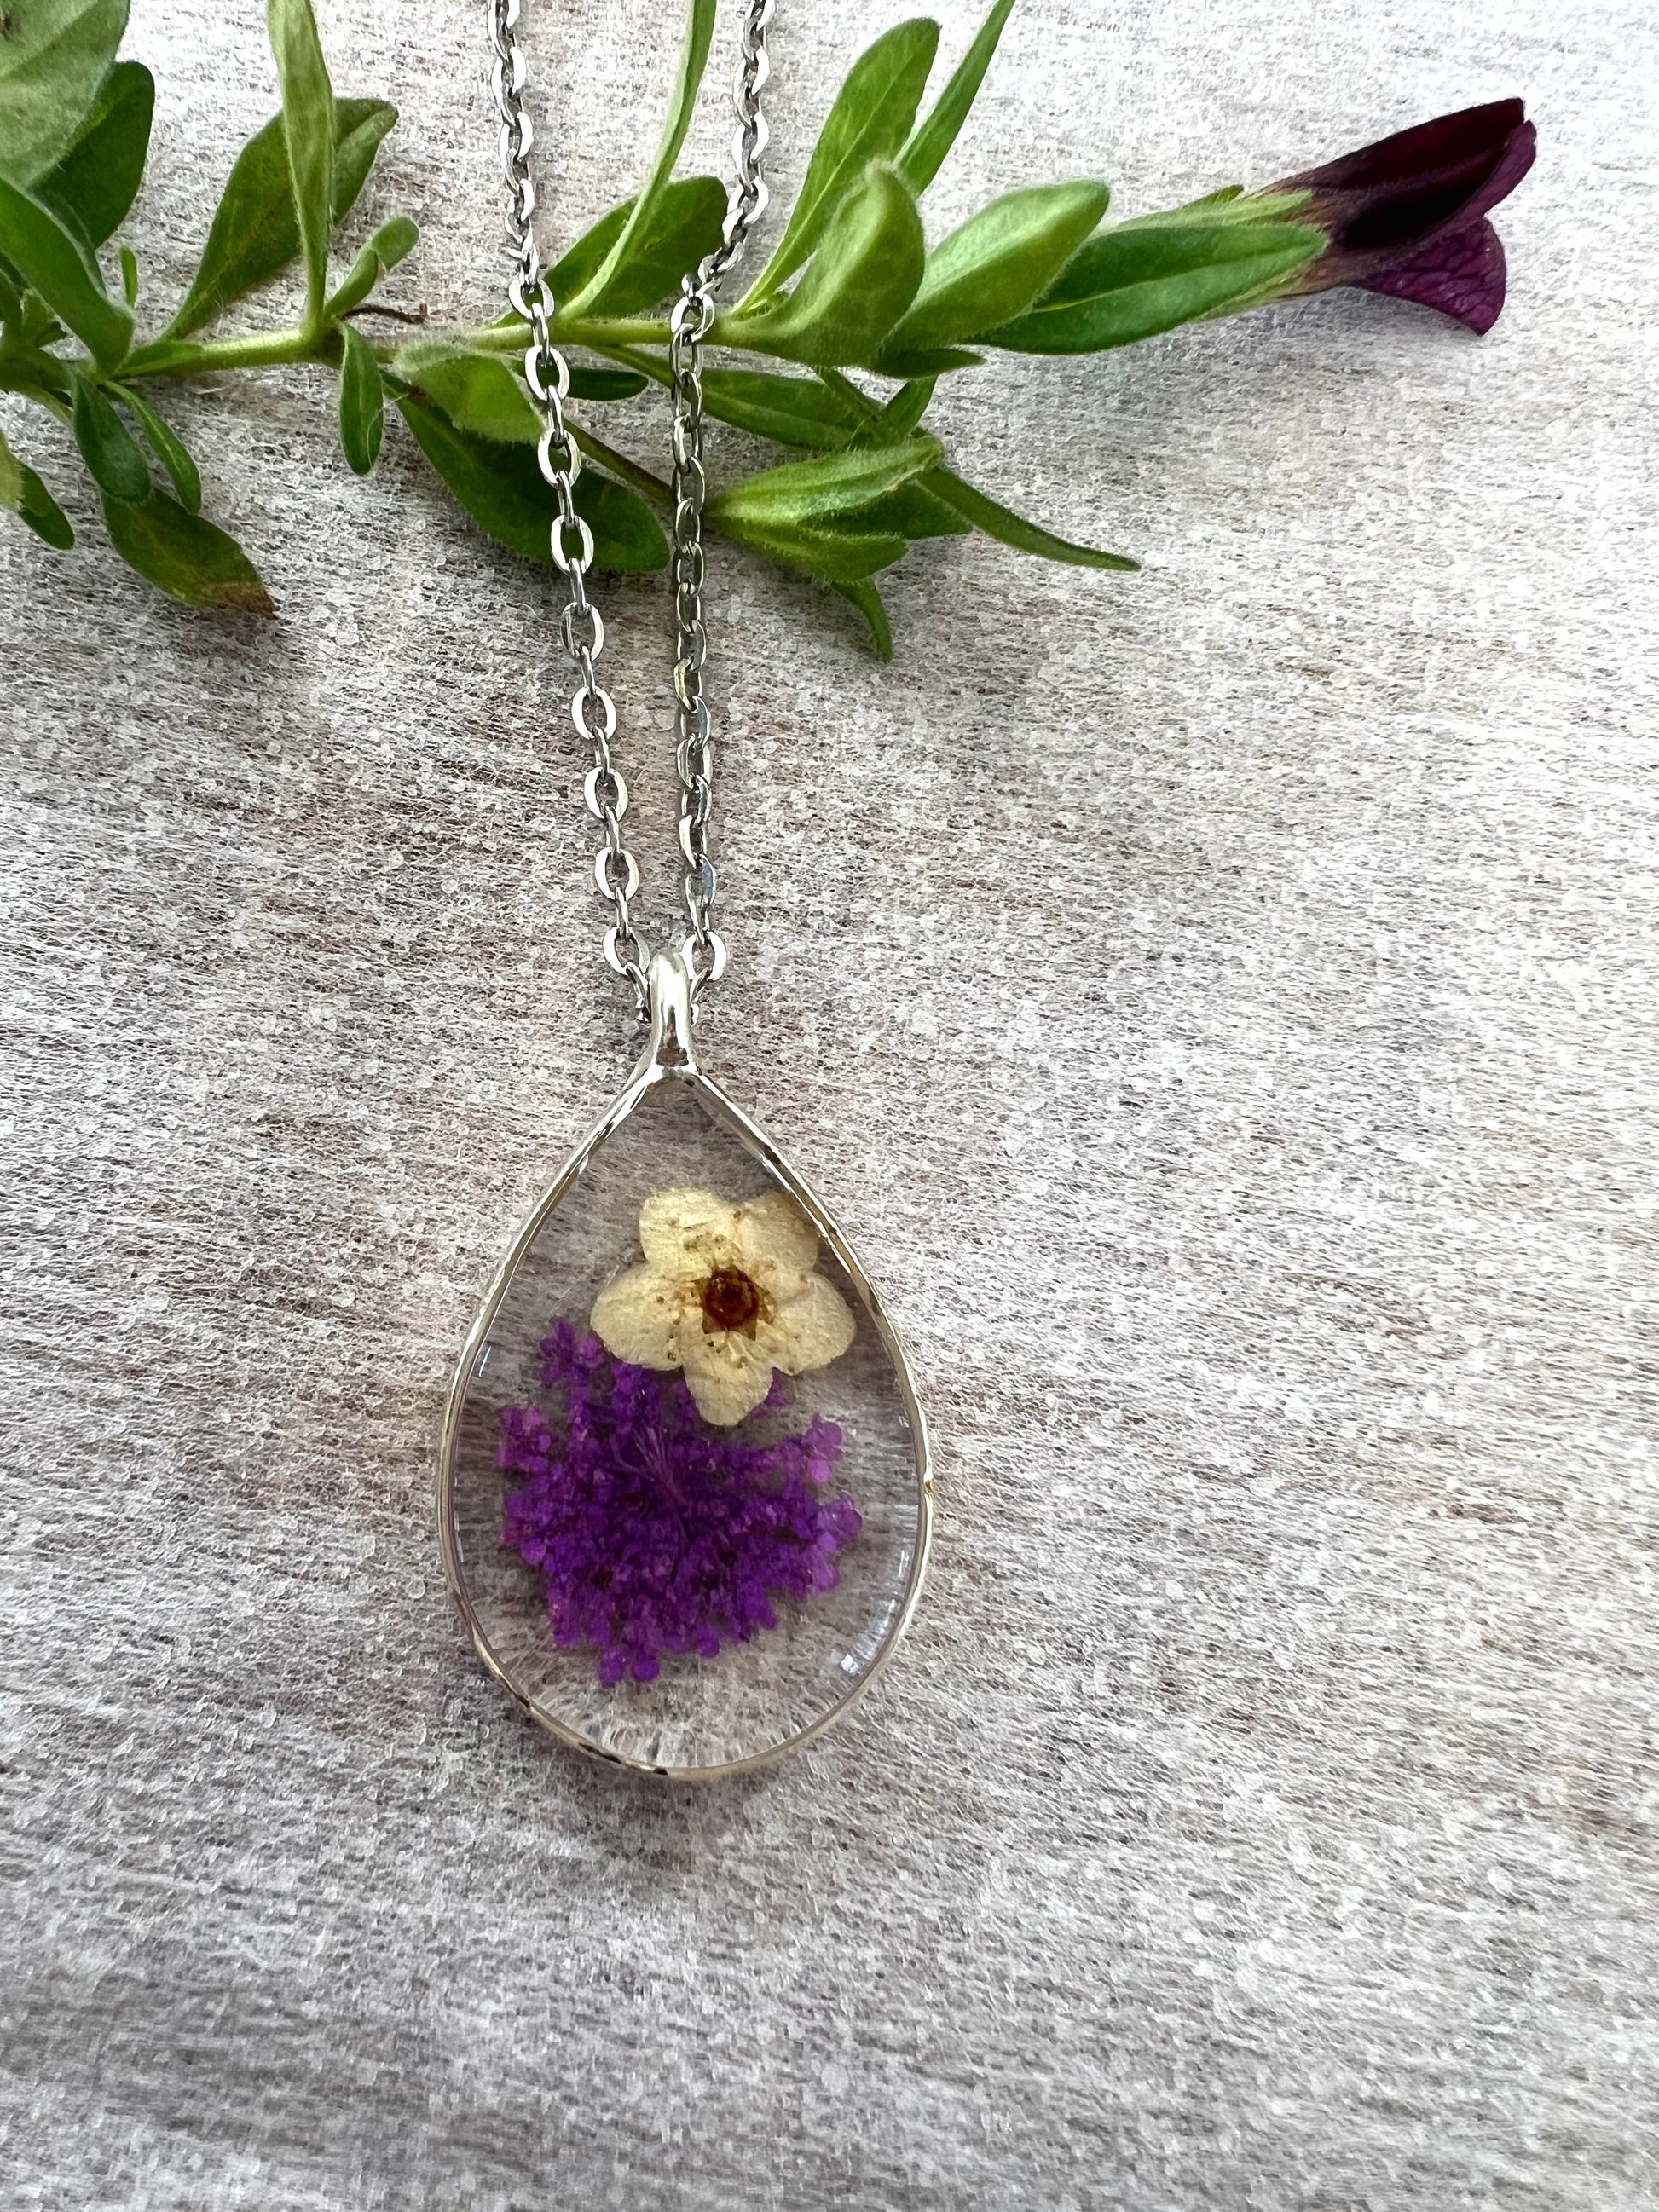 tear drop silver frame with tiny real purple flowers necklace gift birthday anniversary